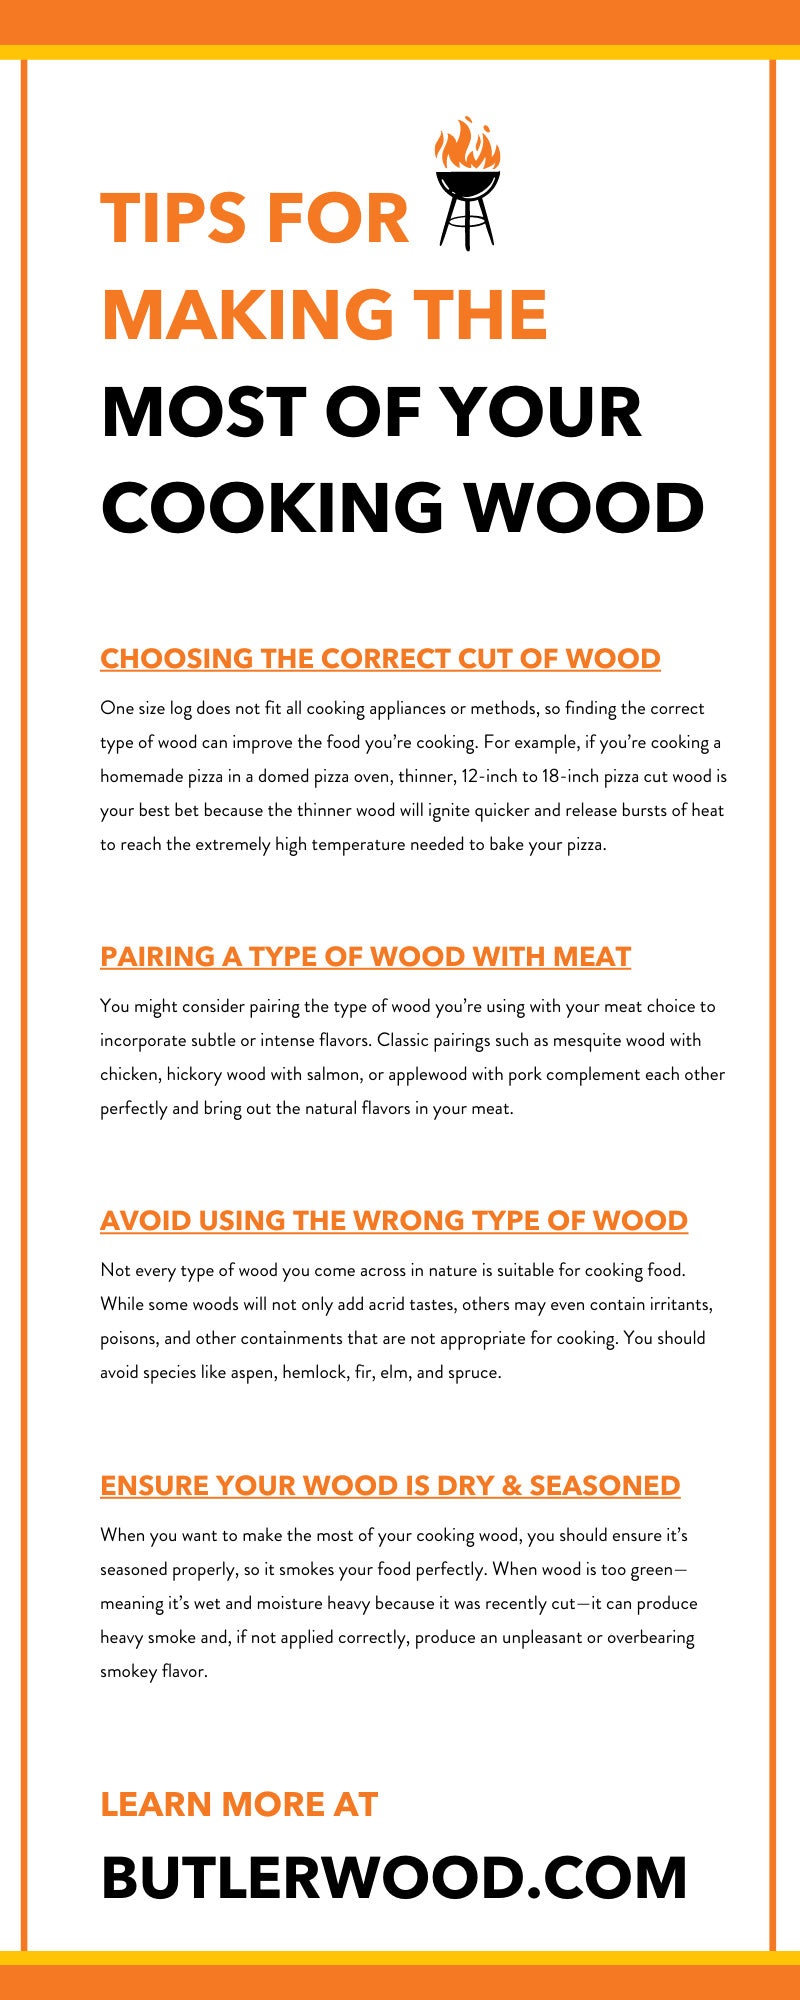 Tips for Making the Most of Your Cooking Wood